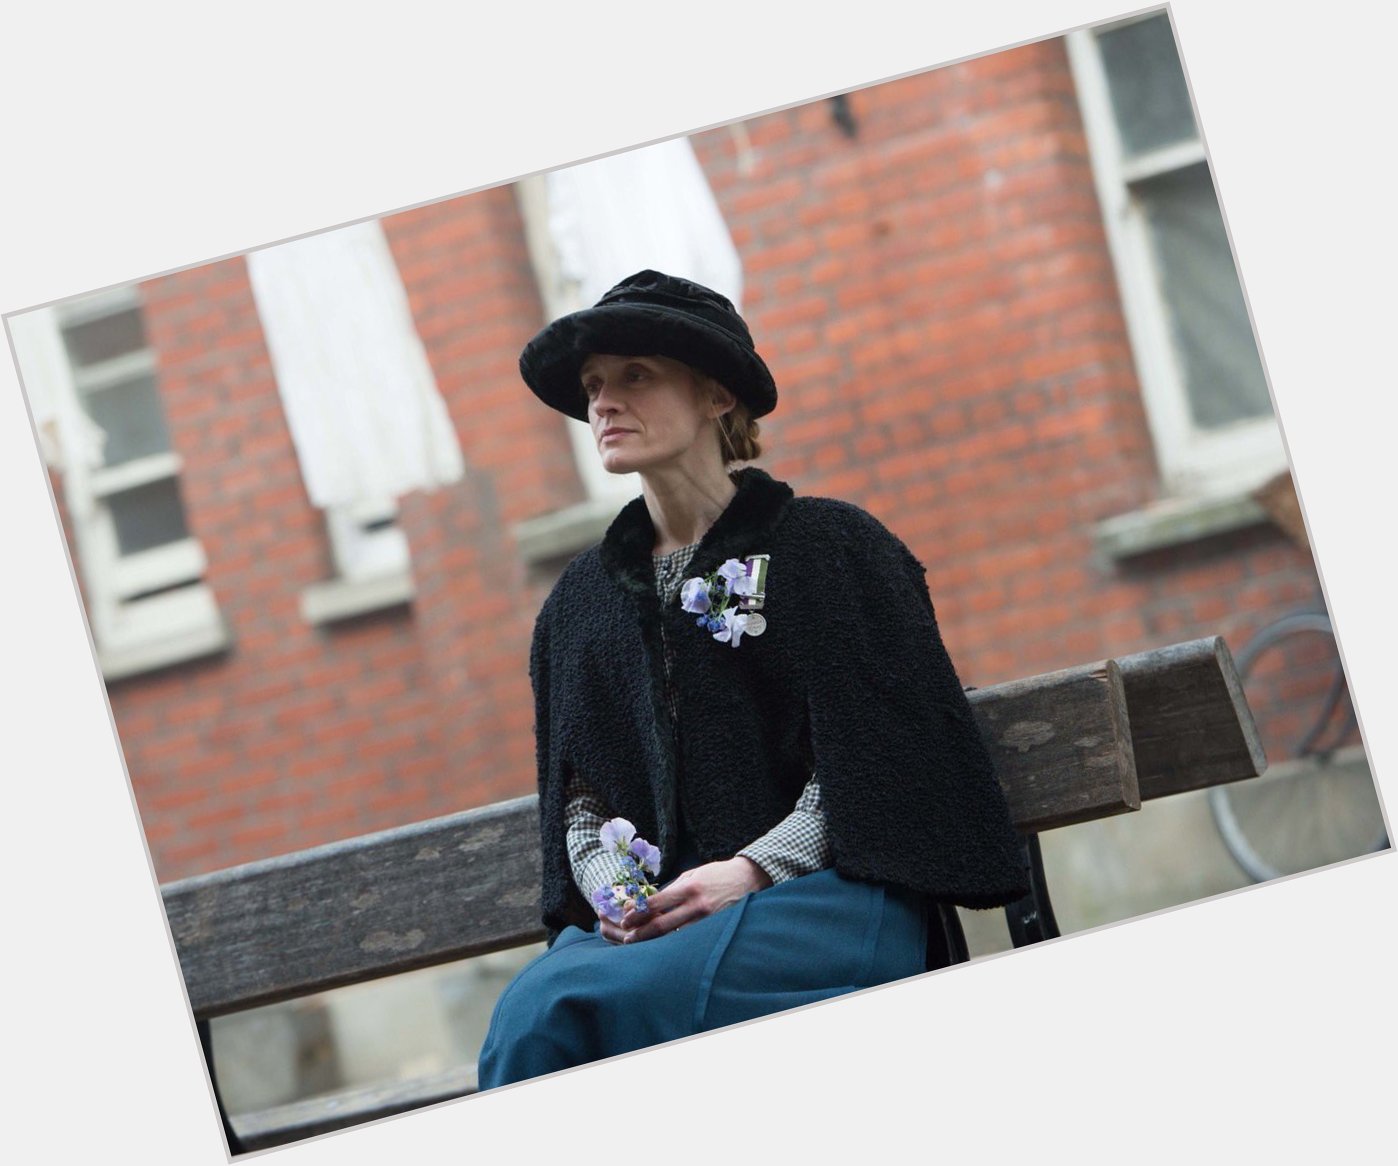 Wishing a very happy birthday to Anne-Marie Duff who played Violet Miller in Suffragette (2015) 